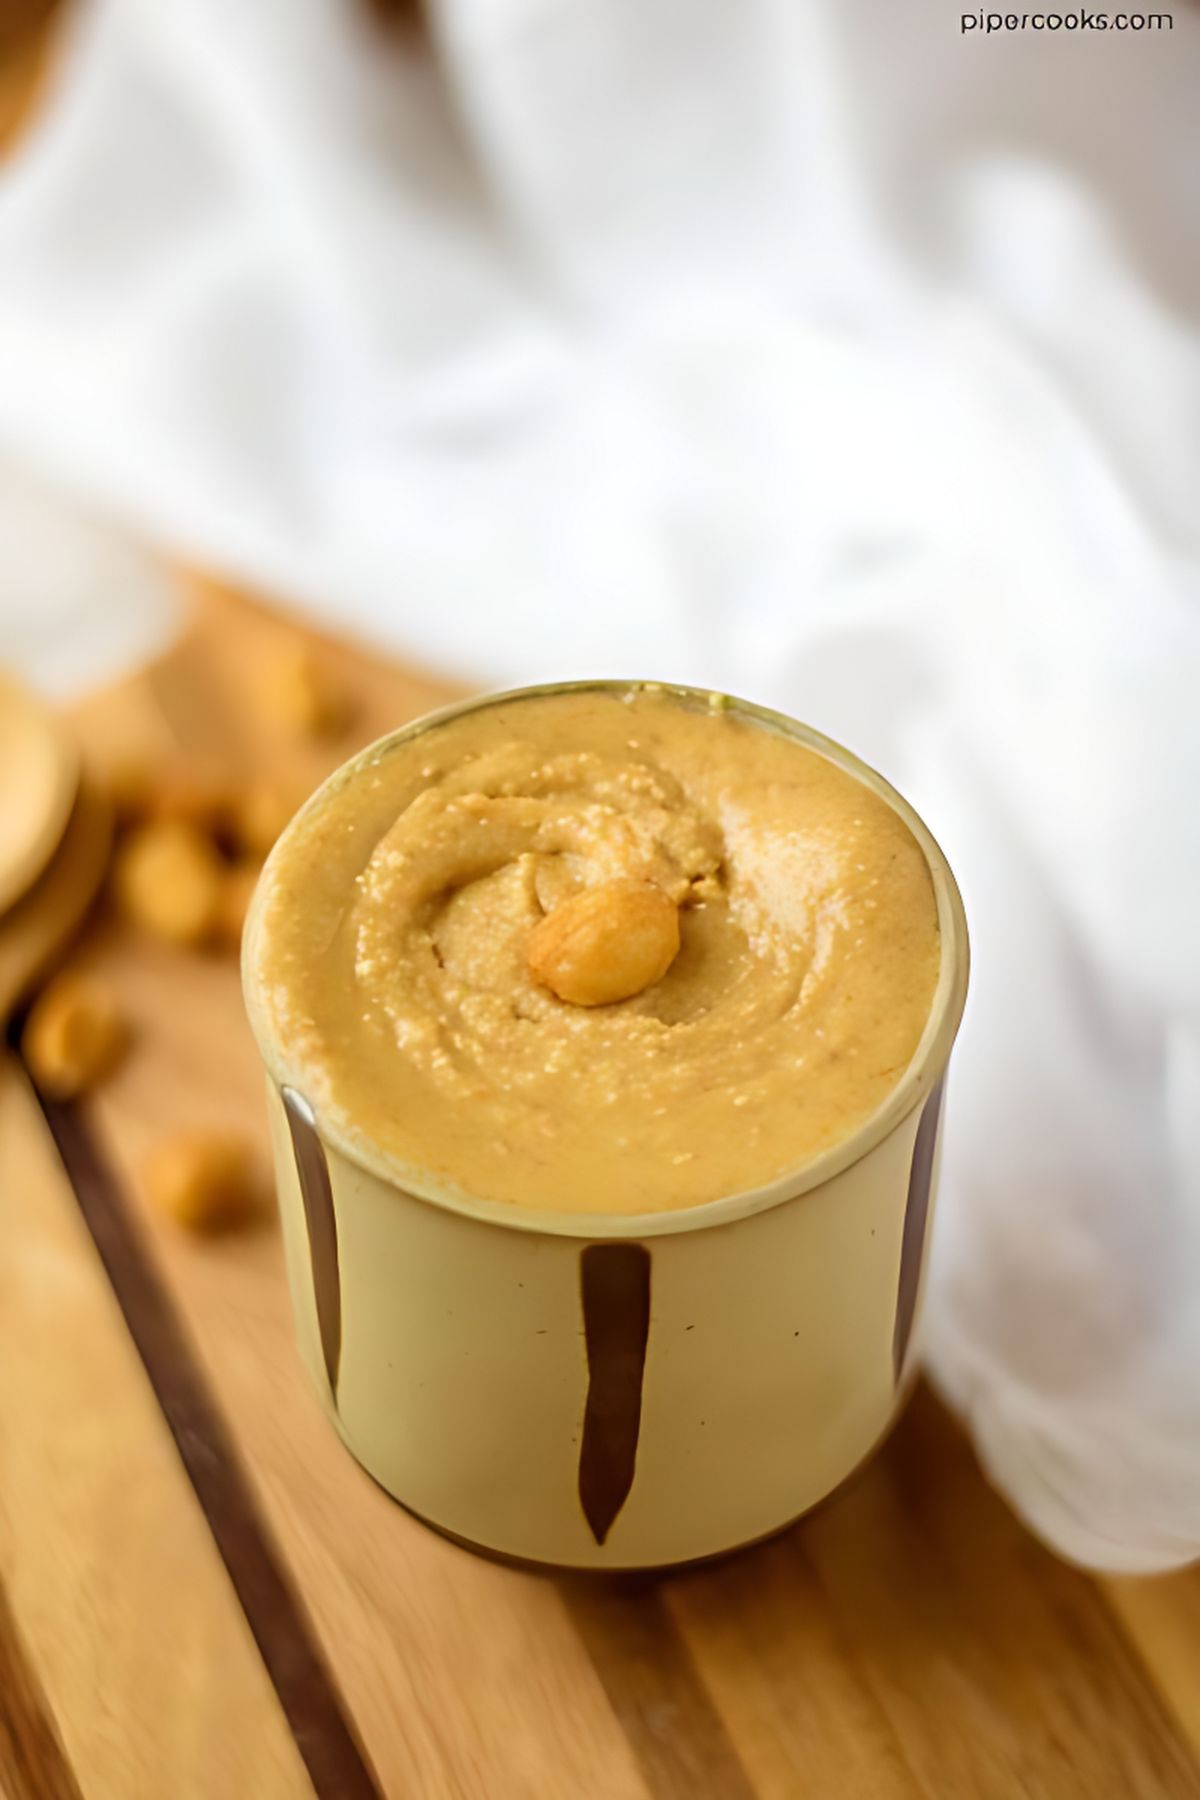 Honey Roasted Peanut Butter in a cup